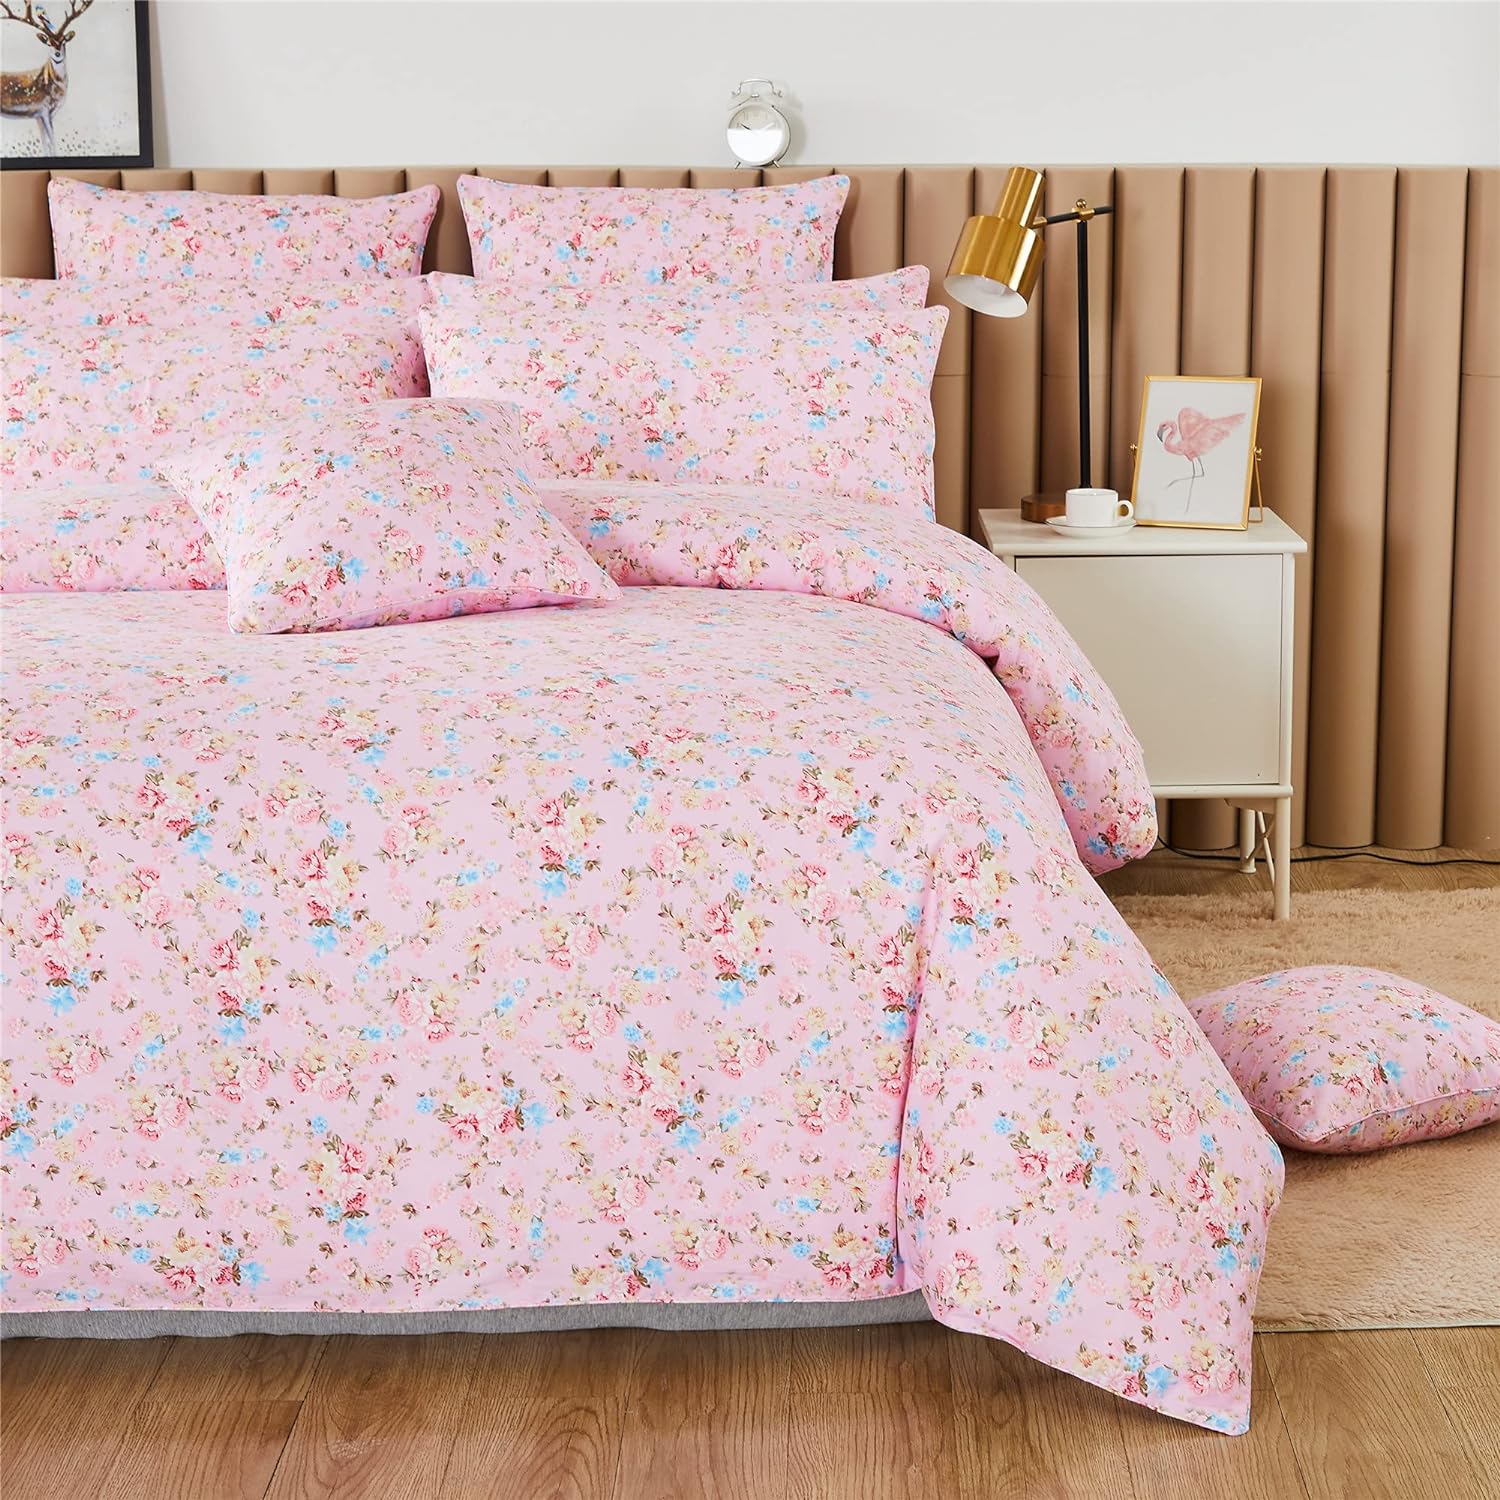 FADFAY Duvet Cover Set Queen Sweet Rose Floral Bedding Shabby Pink Flower Bedding Vintage Farmhouse Bedding 100% Cotton Ultra Soft Comforter Cover Set with Hidden Zipper Closure 3Pcs, Queen Size